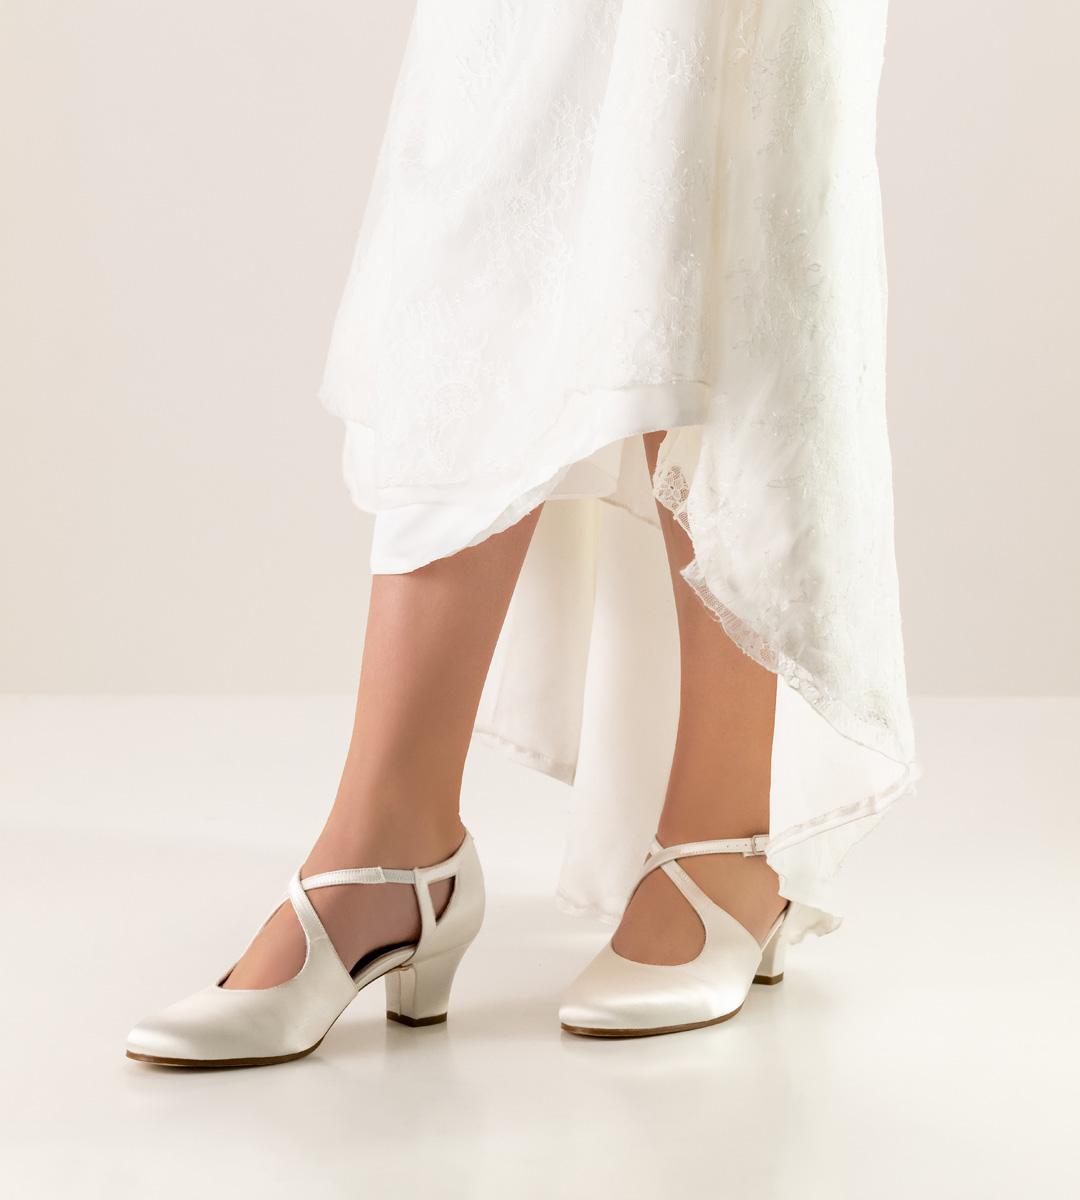 "Werner Kern bridal shoe with leather sole in combination with white wedding dress "